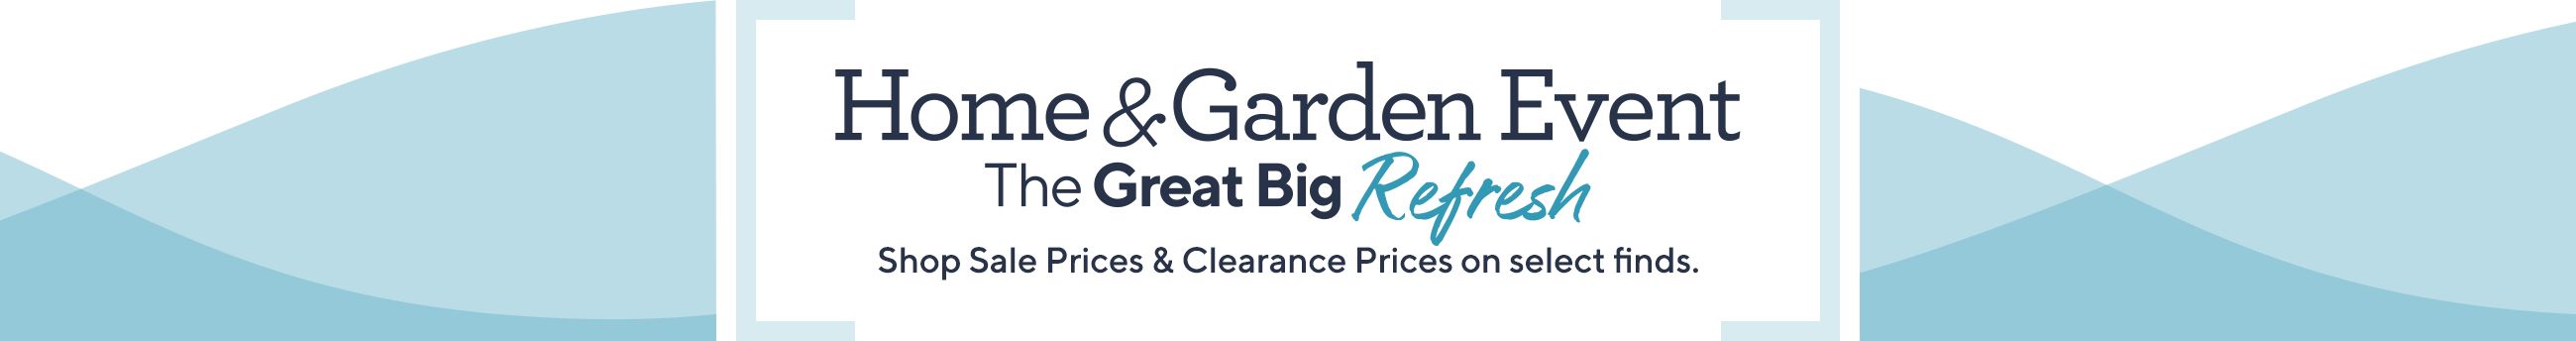 Home & Garden Event—The Big Refresh.  Shop Sale Prices & Clearance Prices on select finds.